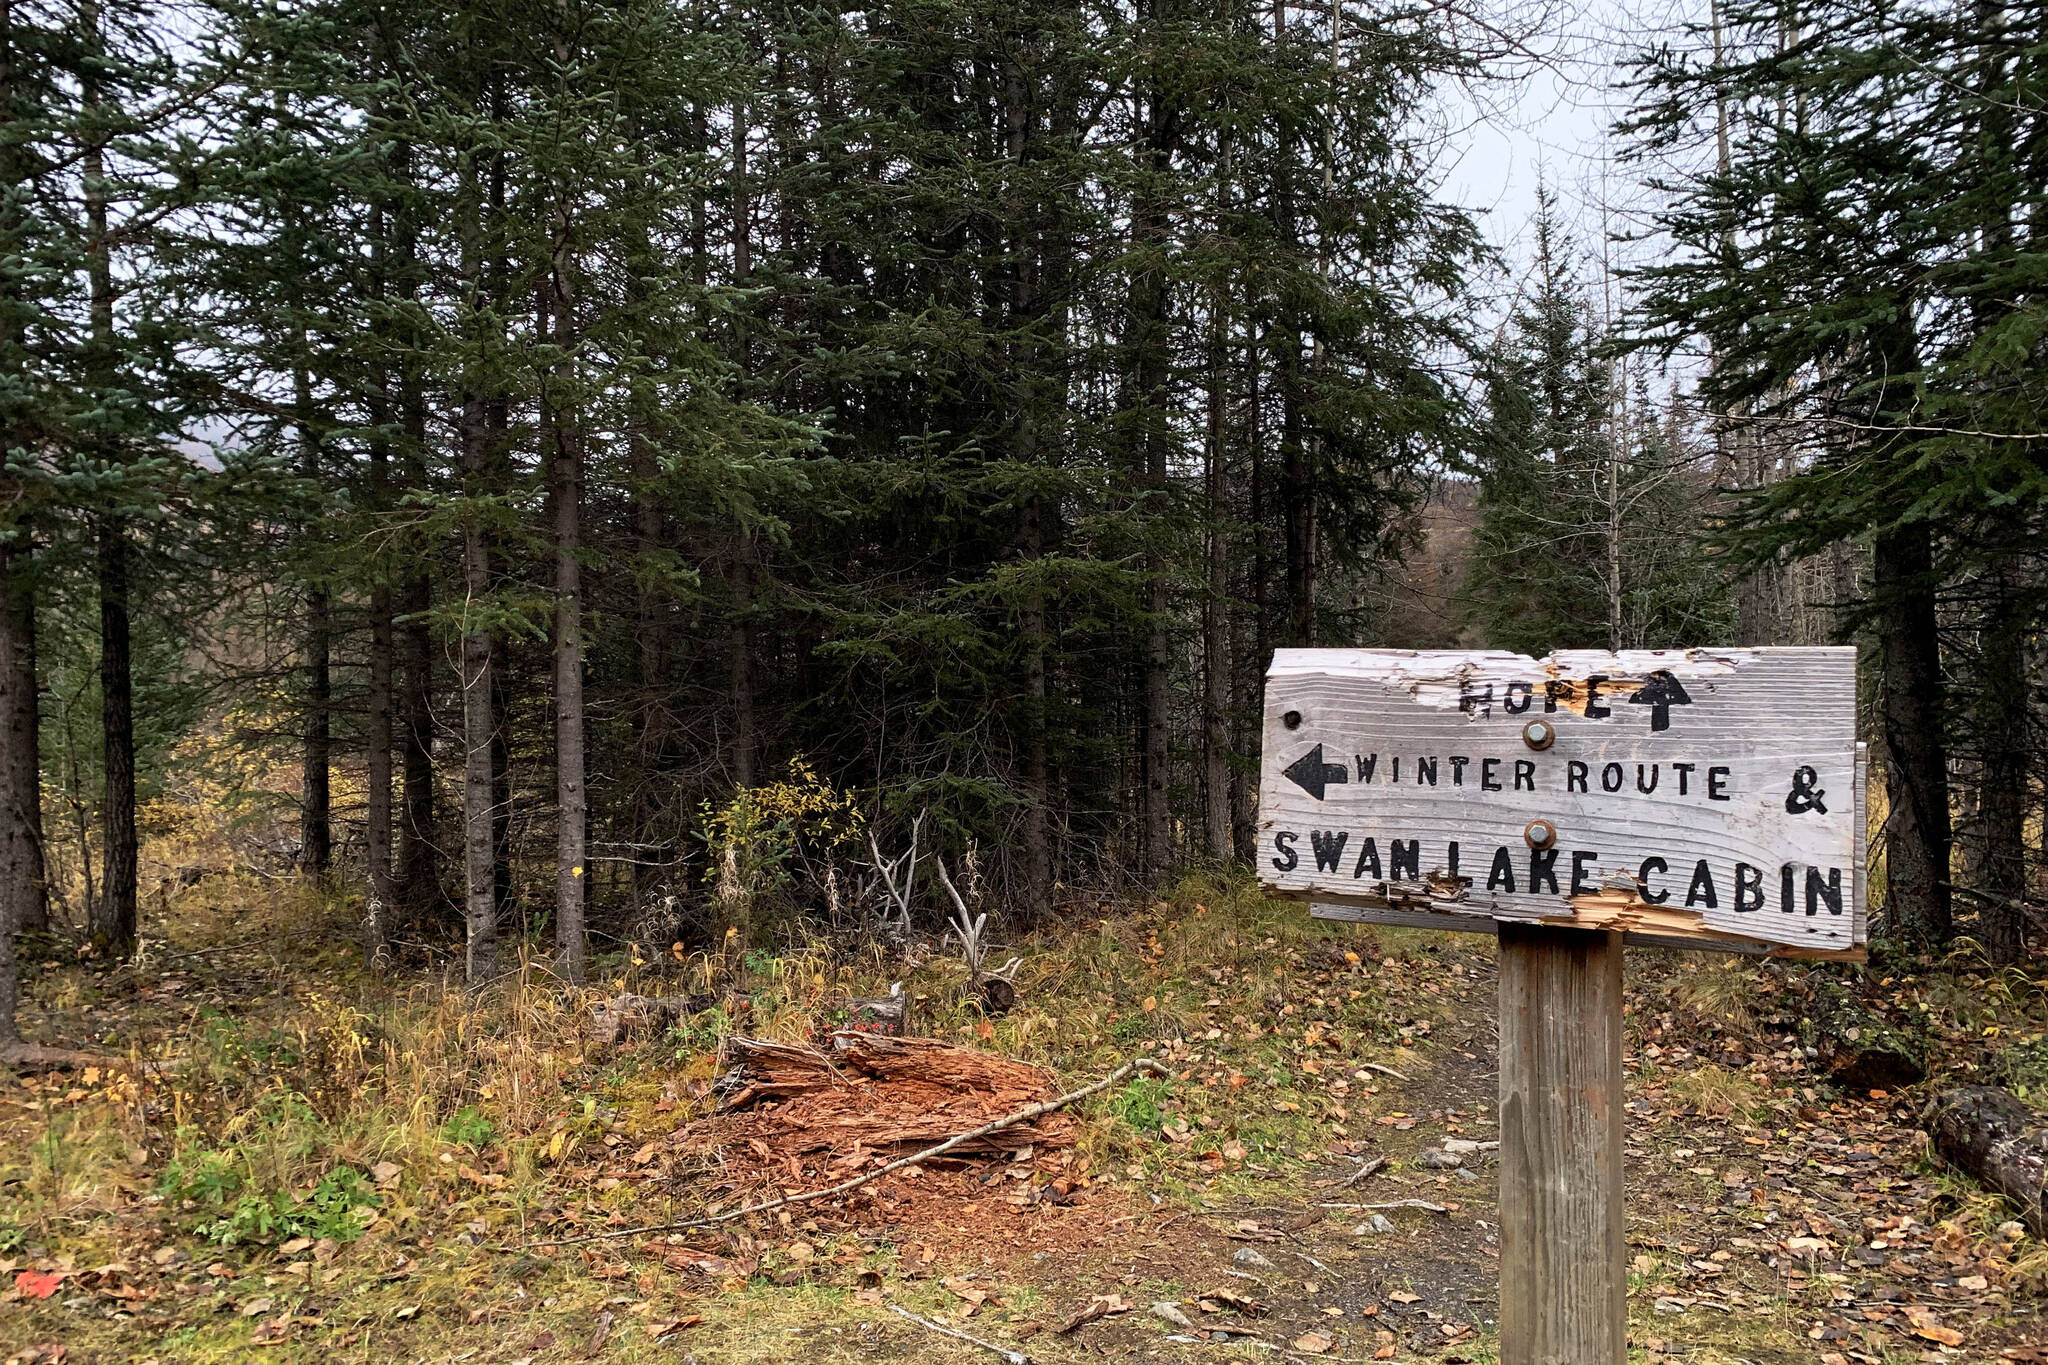 Signage points the way to the Swan Lake Cabin in the Chugach National Forest on Saturday, Oct. 1, 2022, near Cooper Landing, Alaska. (Ashlyn O’Hara/Peninsula Clarion)